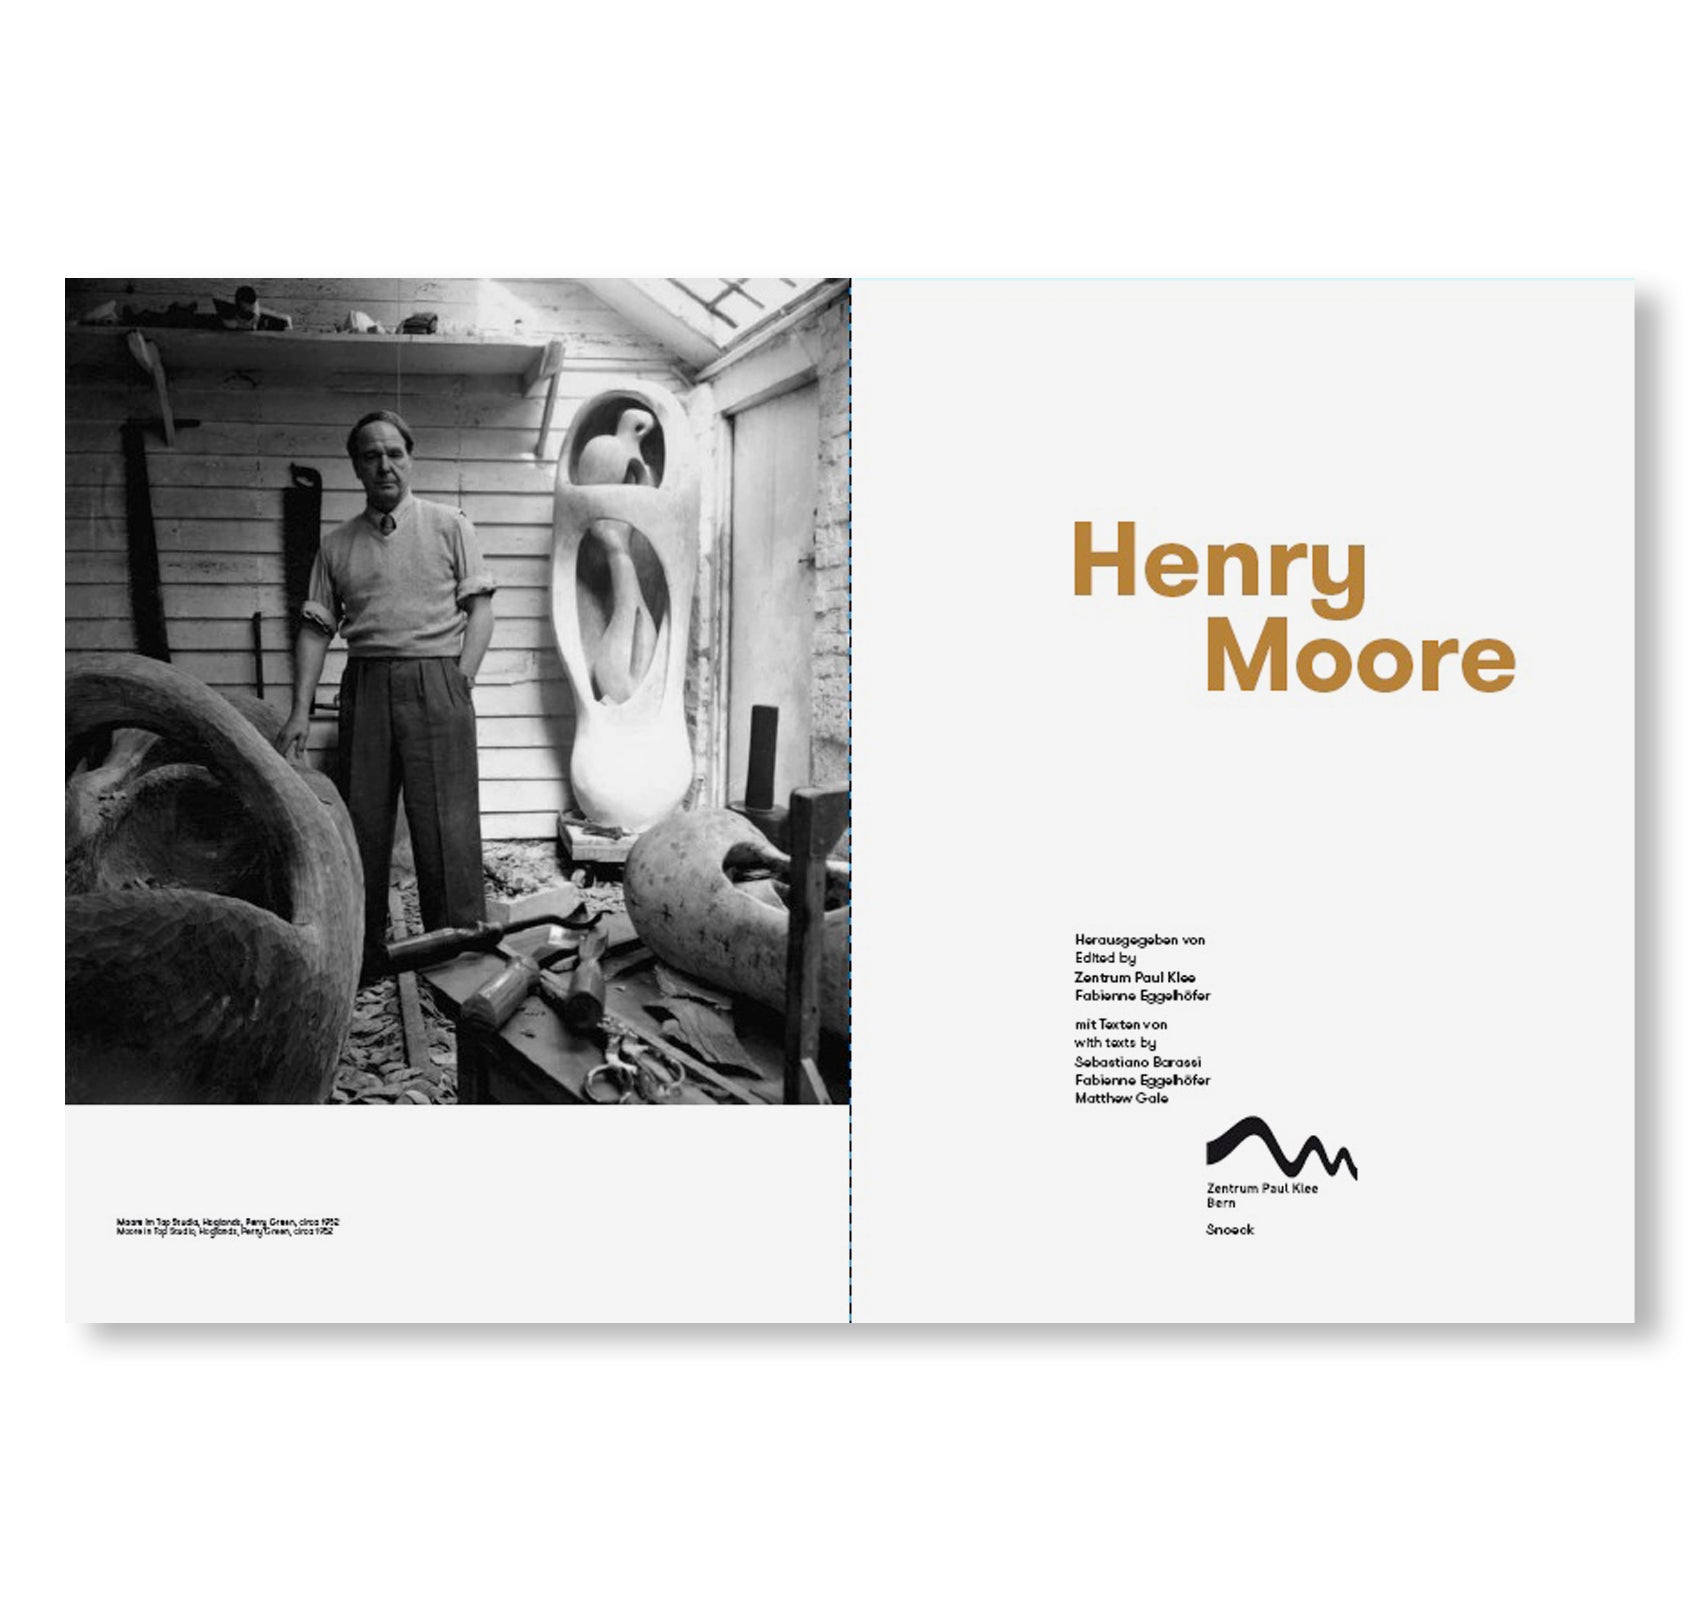 HENRY MOORE by Henry Moore